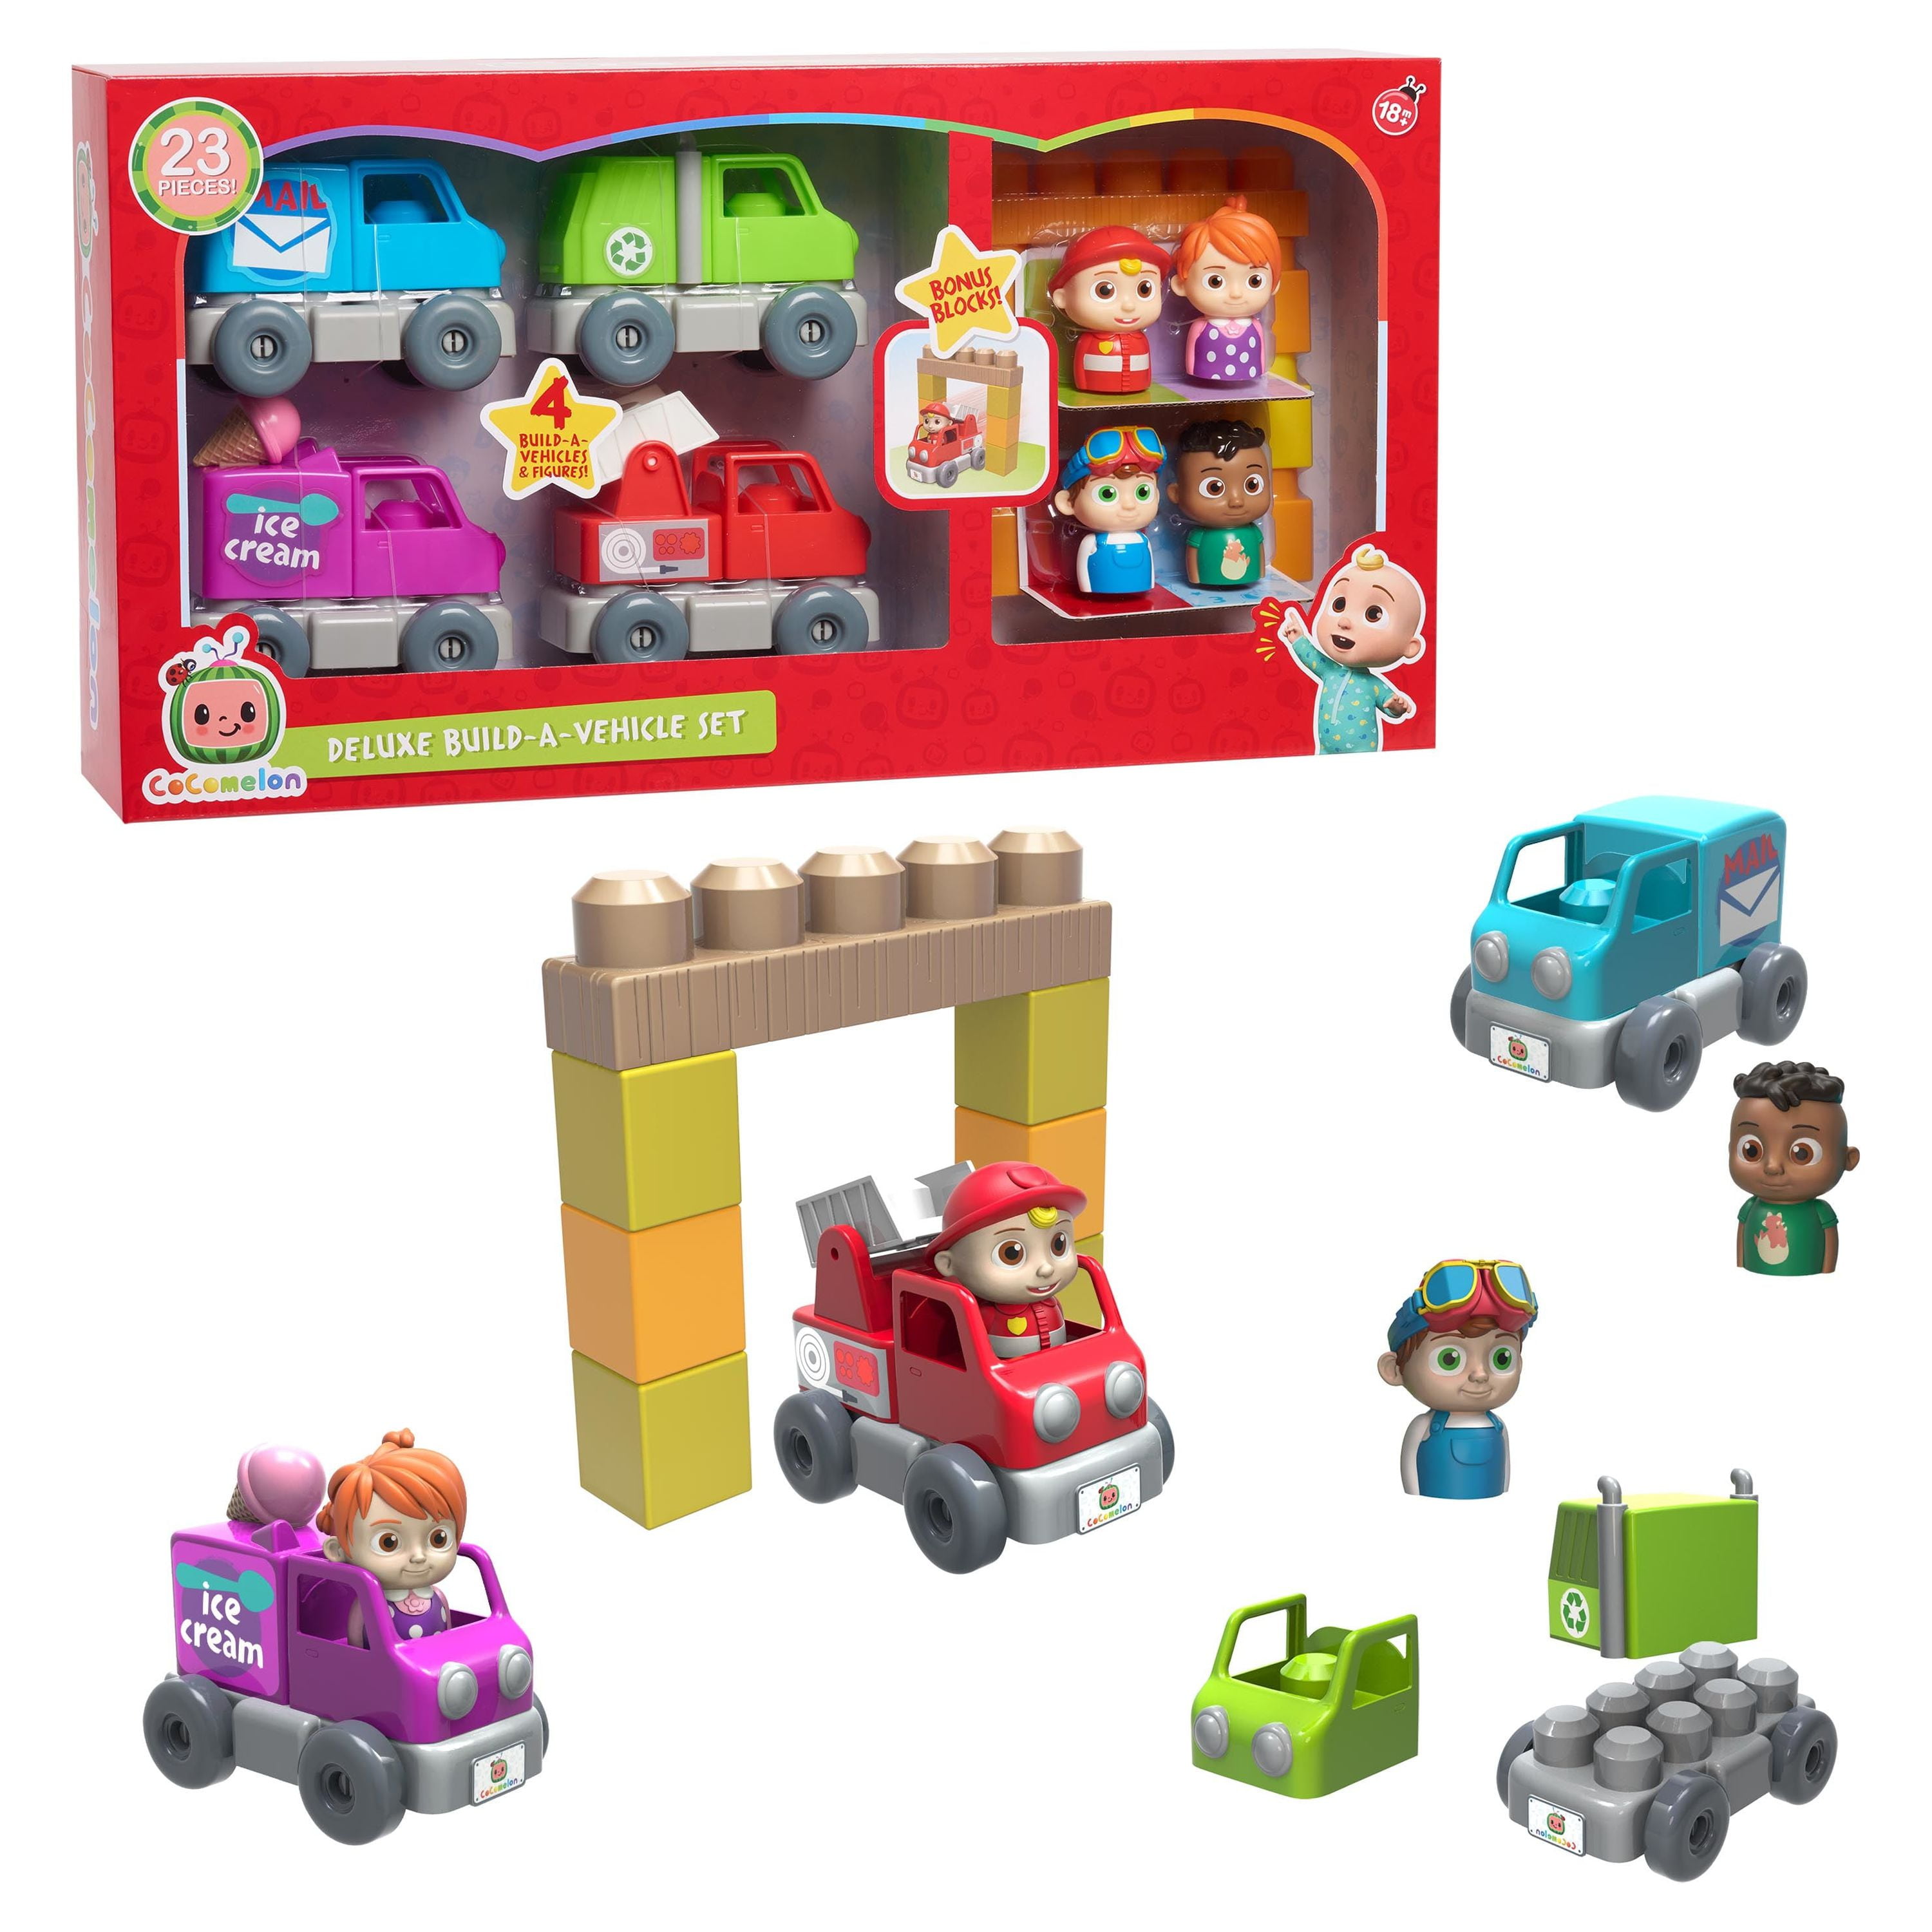 23-Piece Just Play CoComelon Kids' Build A Vehicle Playset w/ 4 Vehicles & 4 Figures $8.15 + Free Shipping w/ Walmart+ or on $35+